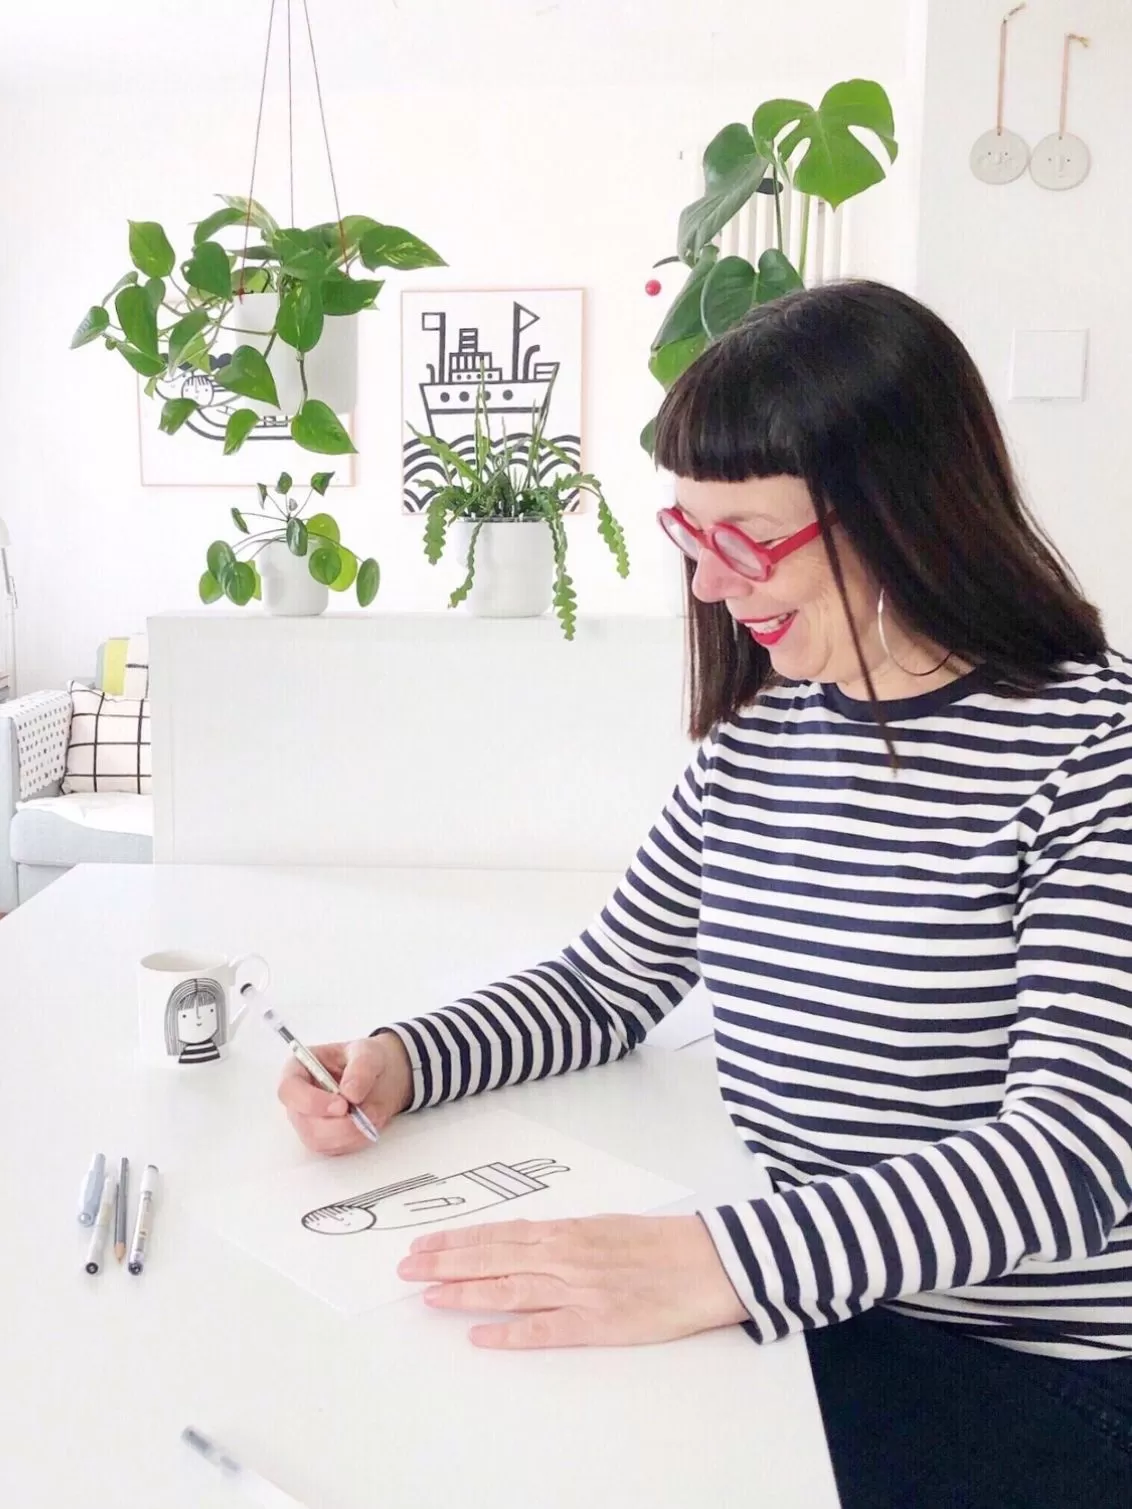 Jane sat at a desk drawing an illustration smiling wearing bright red frames